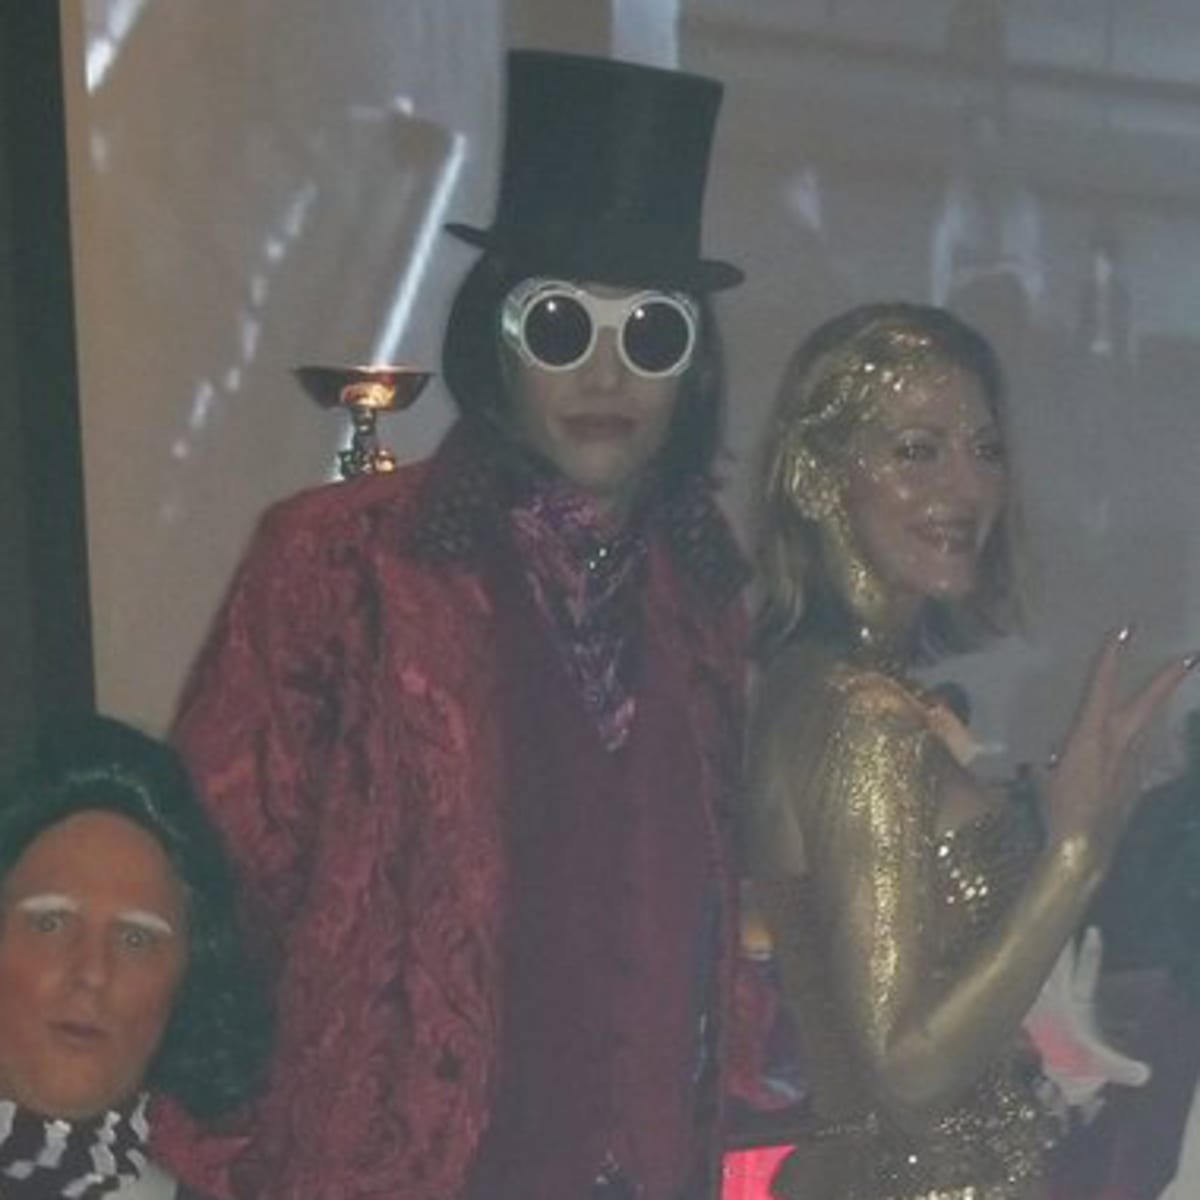 LeBron's Halloween party features some incredible costumes